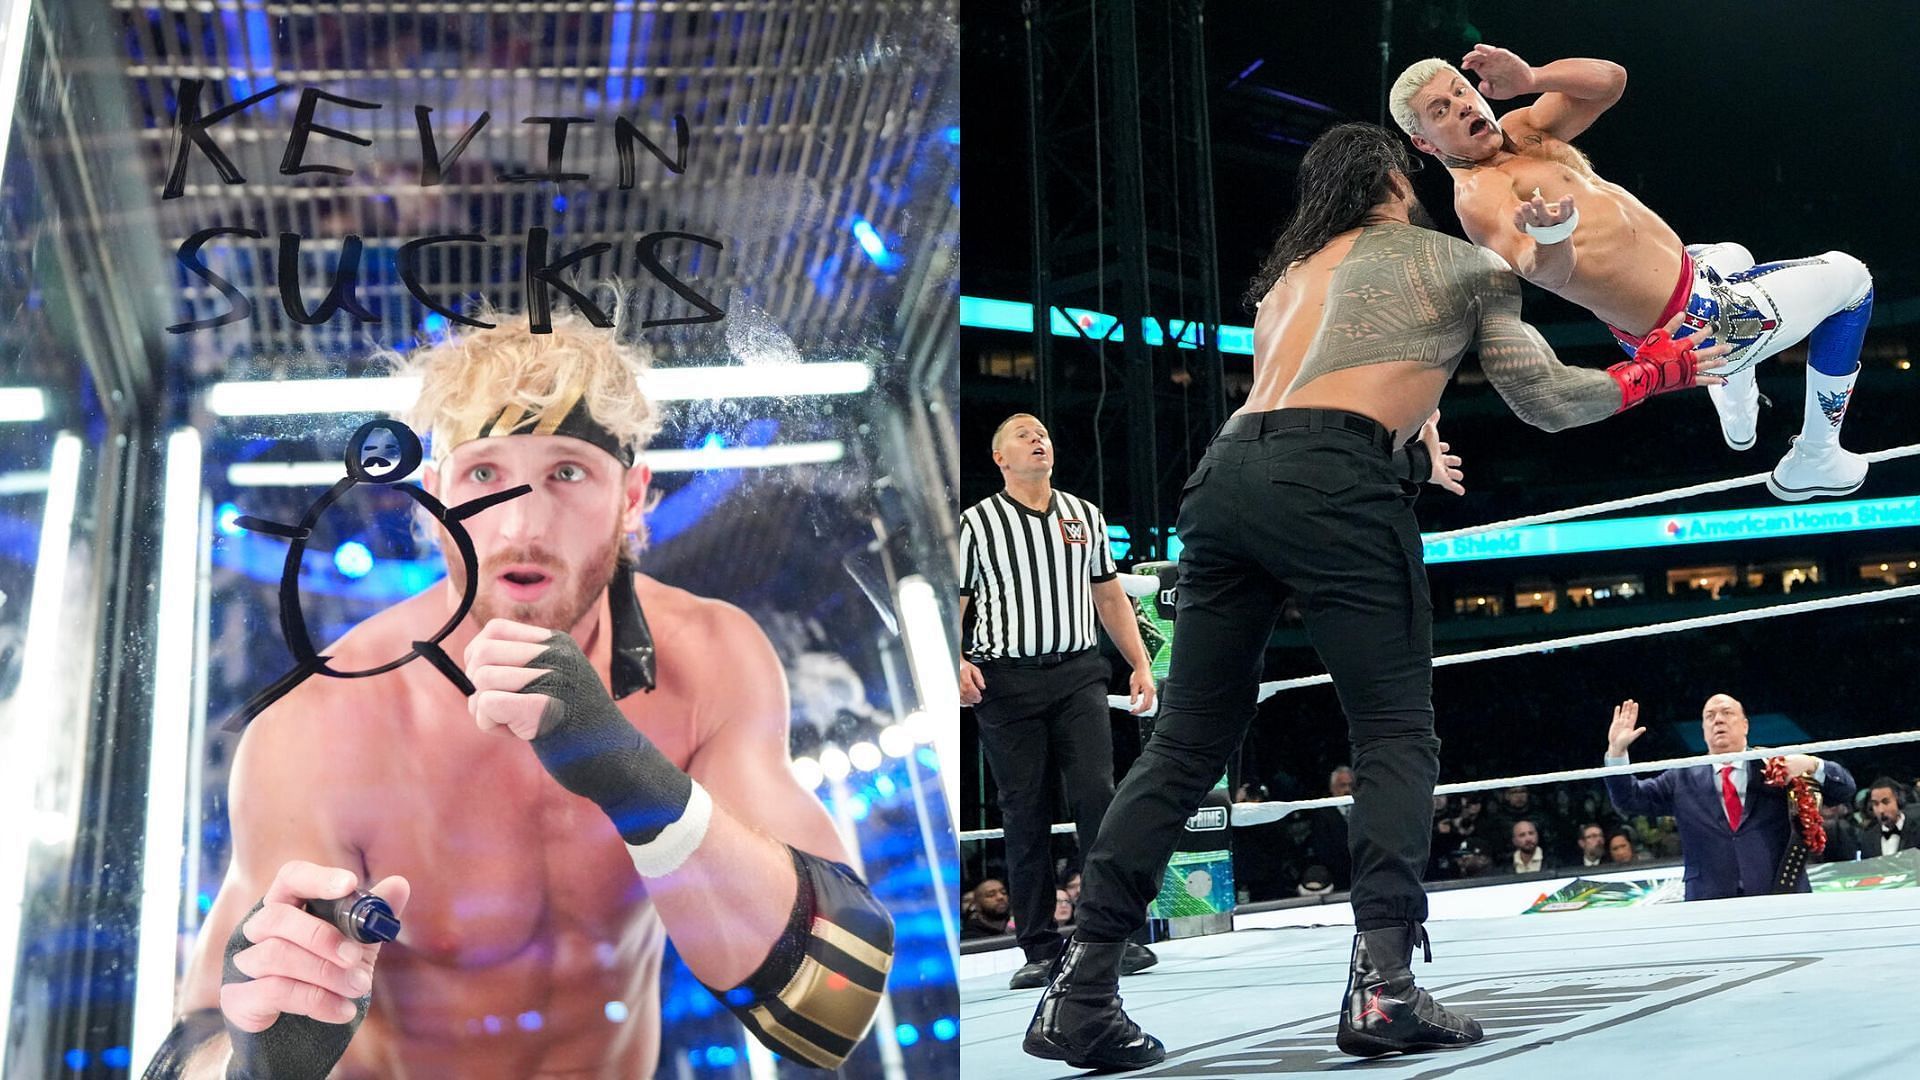 Logan Paul, Cody Rhodes, and Roman Reigns were all in action at WrestleMania 40